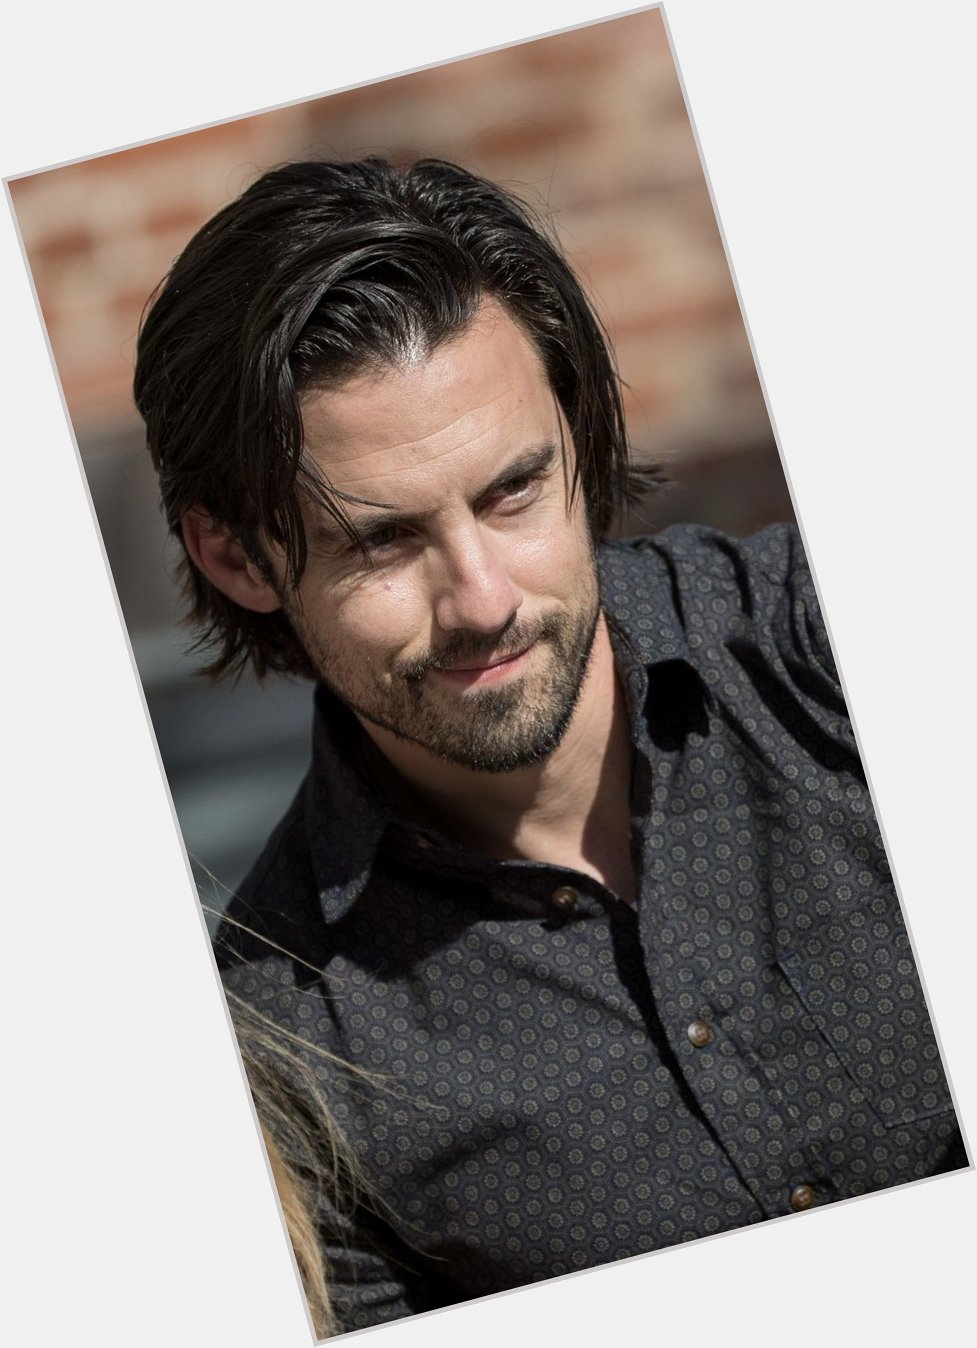 Happy birthday to the one and only milo ventimiglia <333 